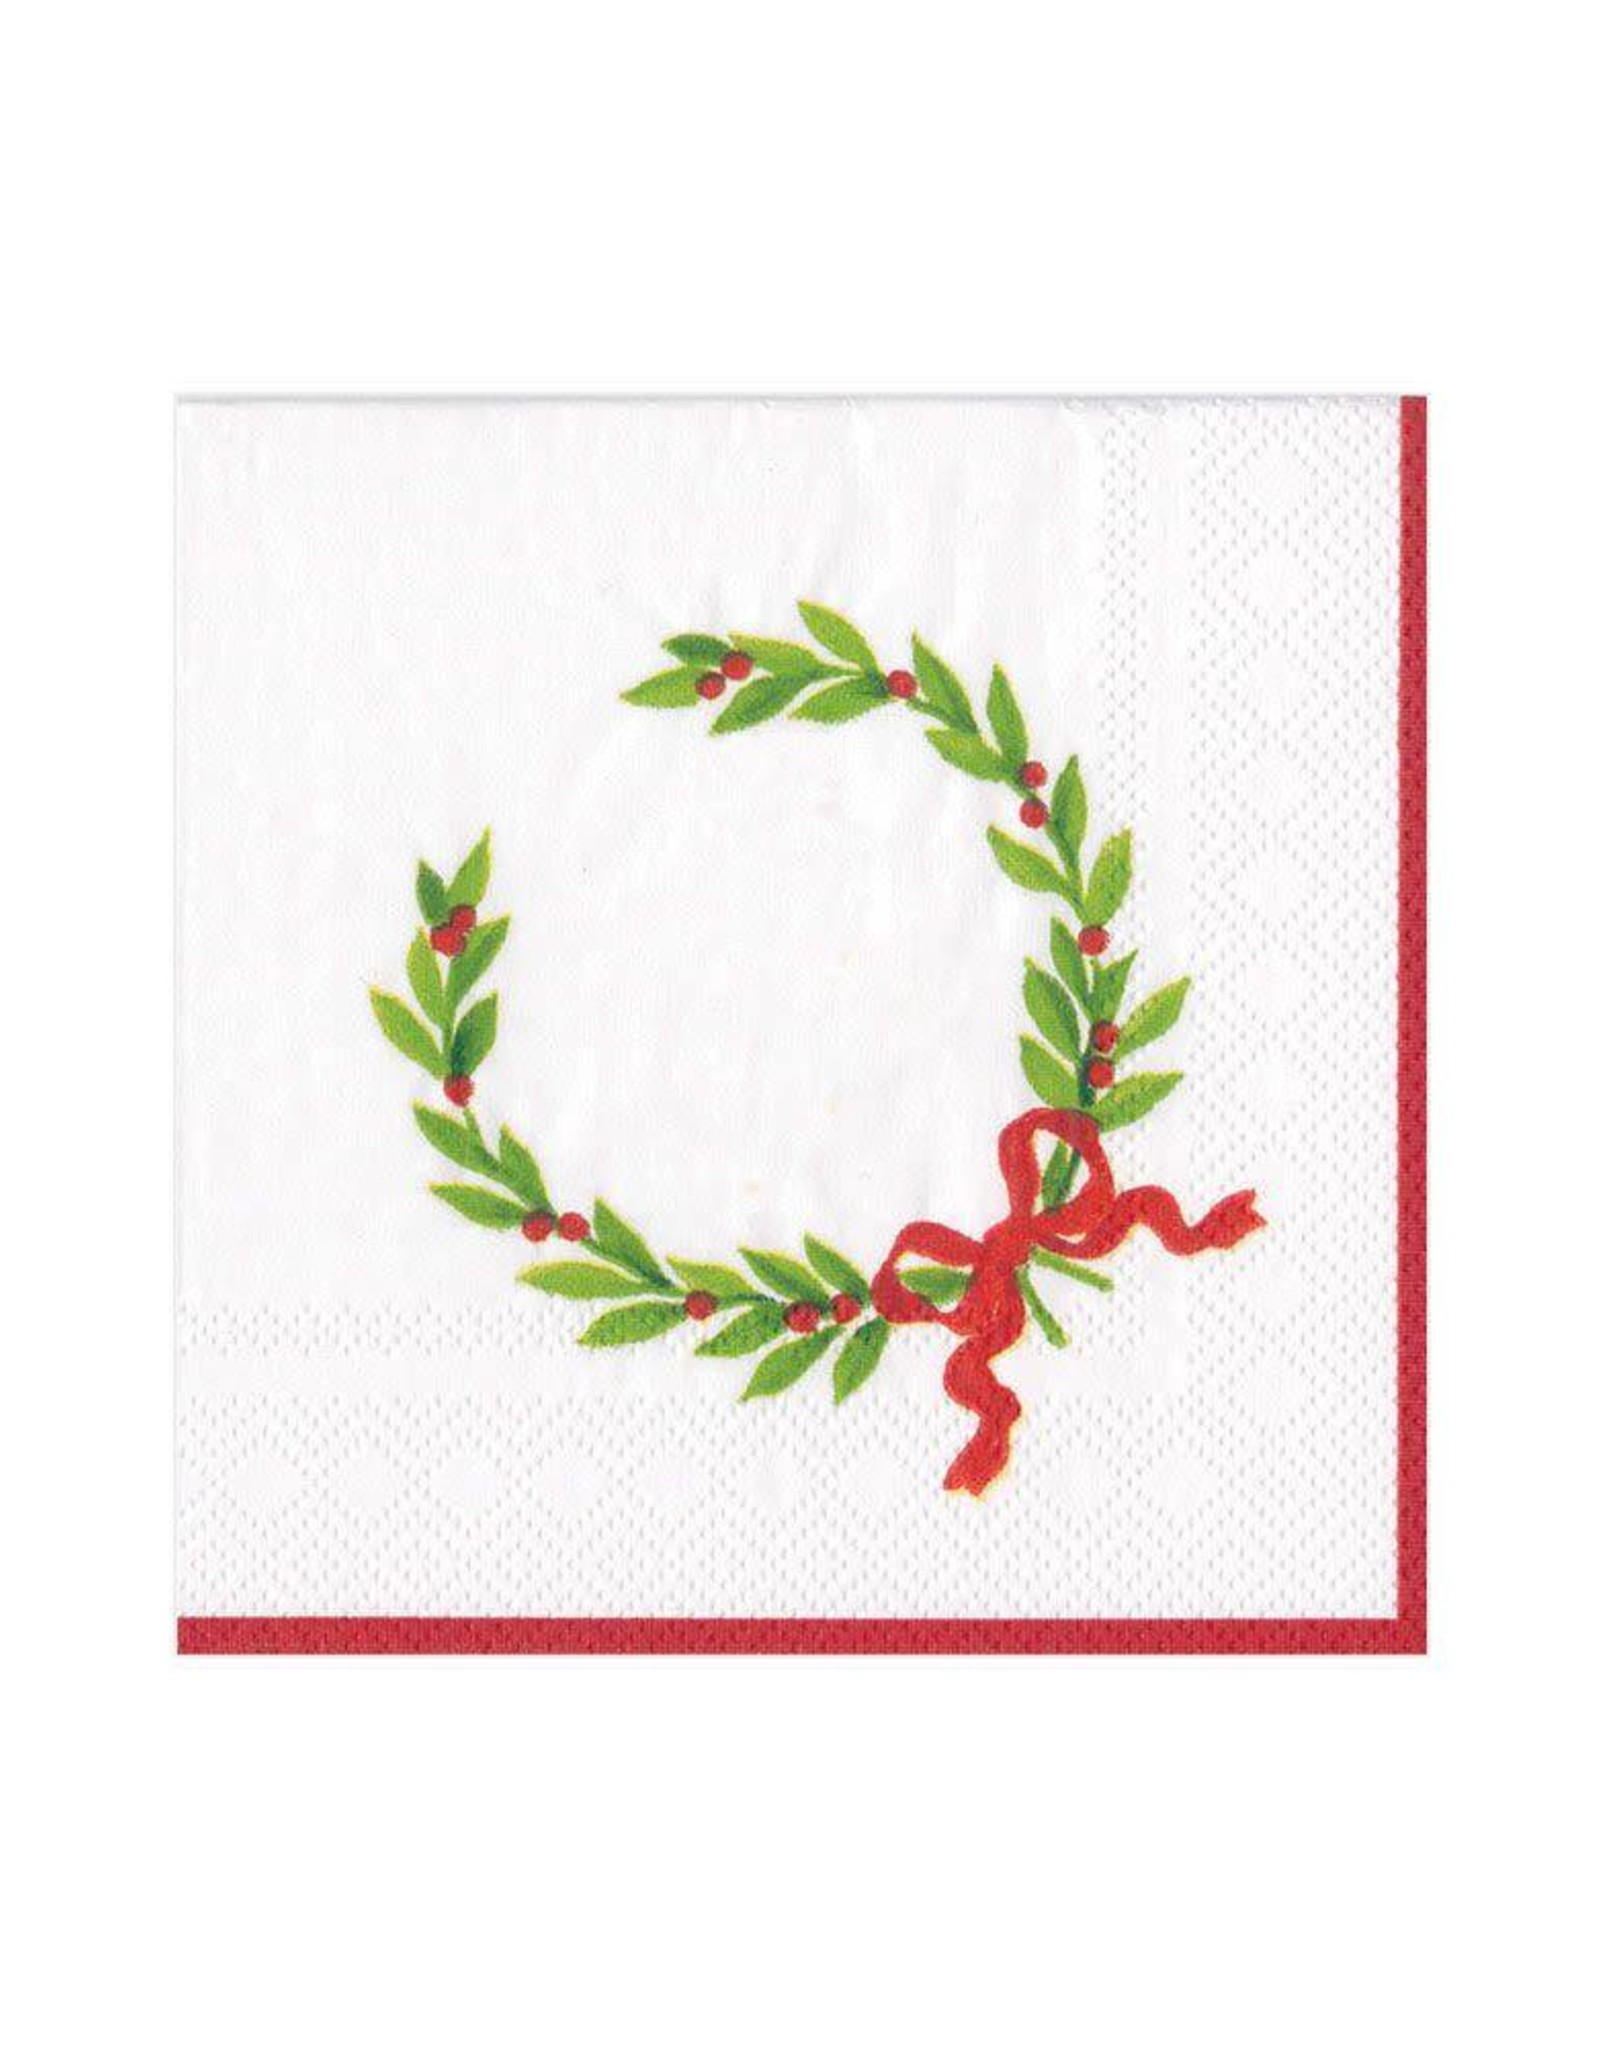 Christmas Laurel Wreath with Initial "M" Beverage Napkin (20ct)